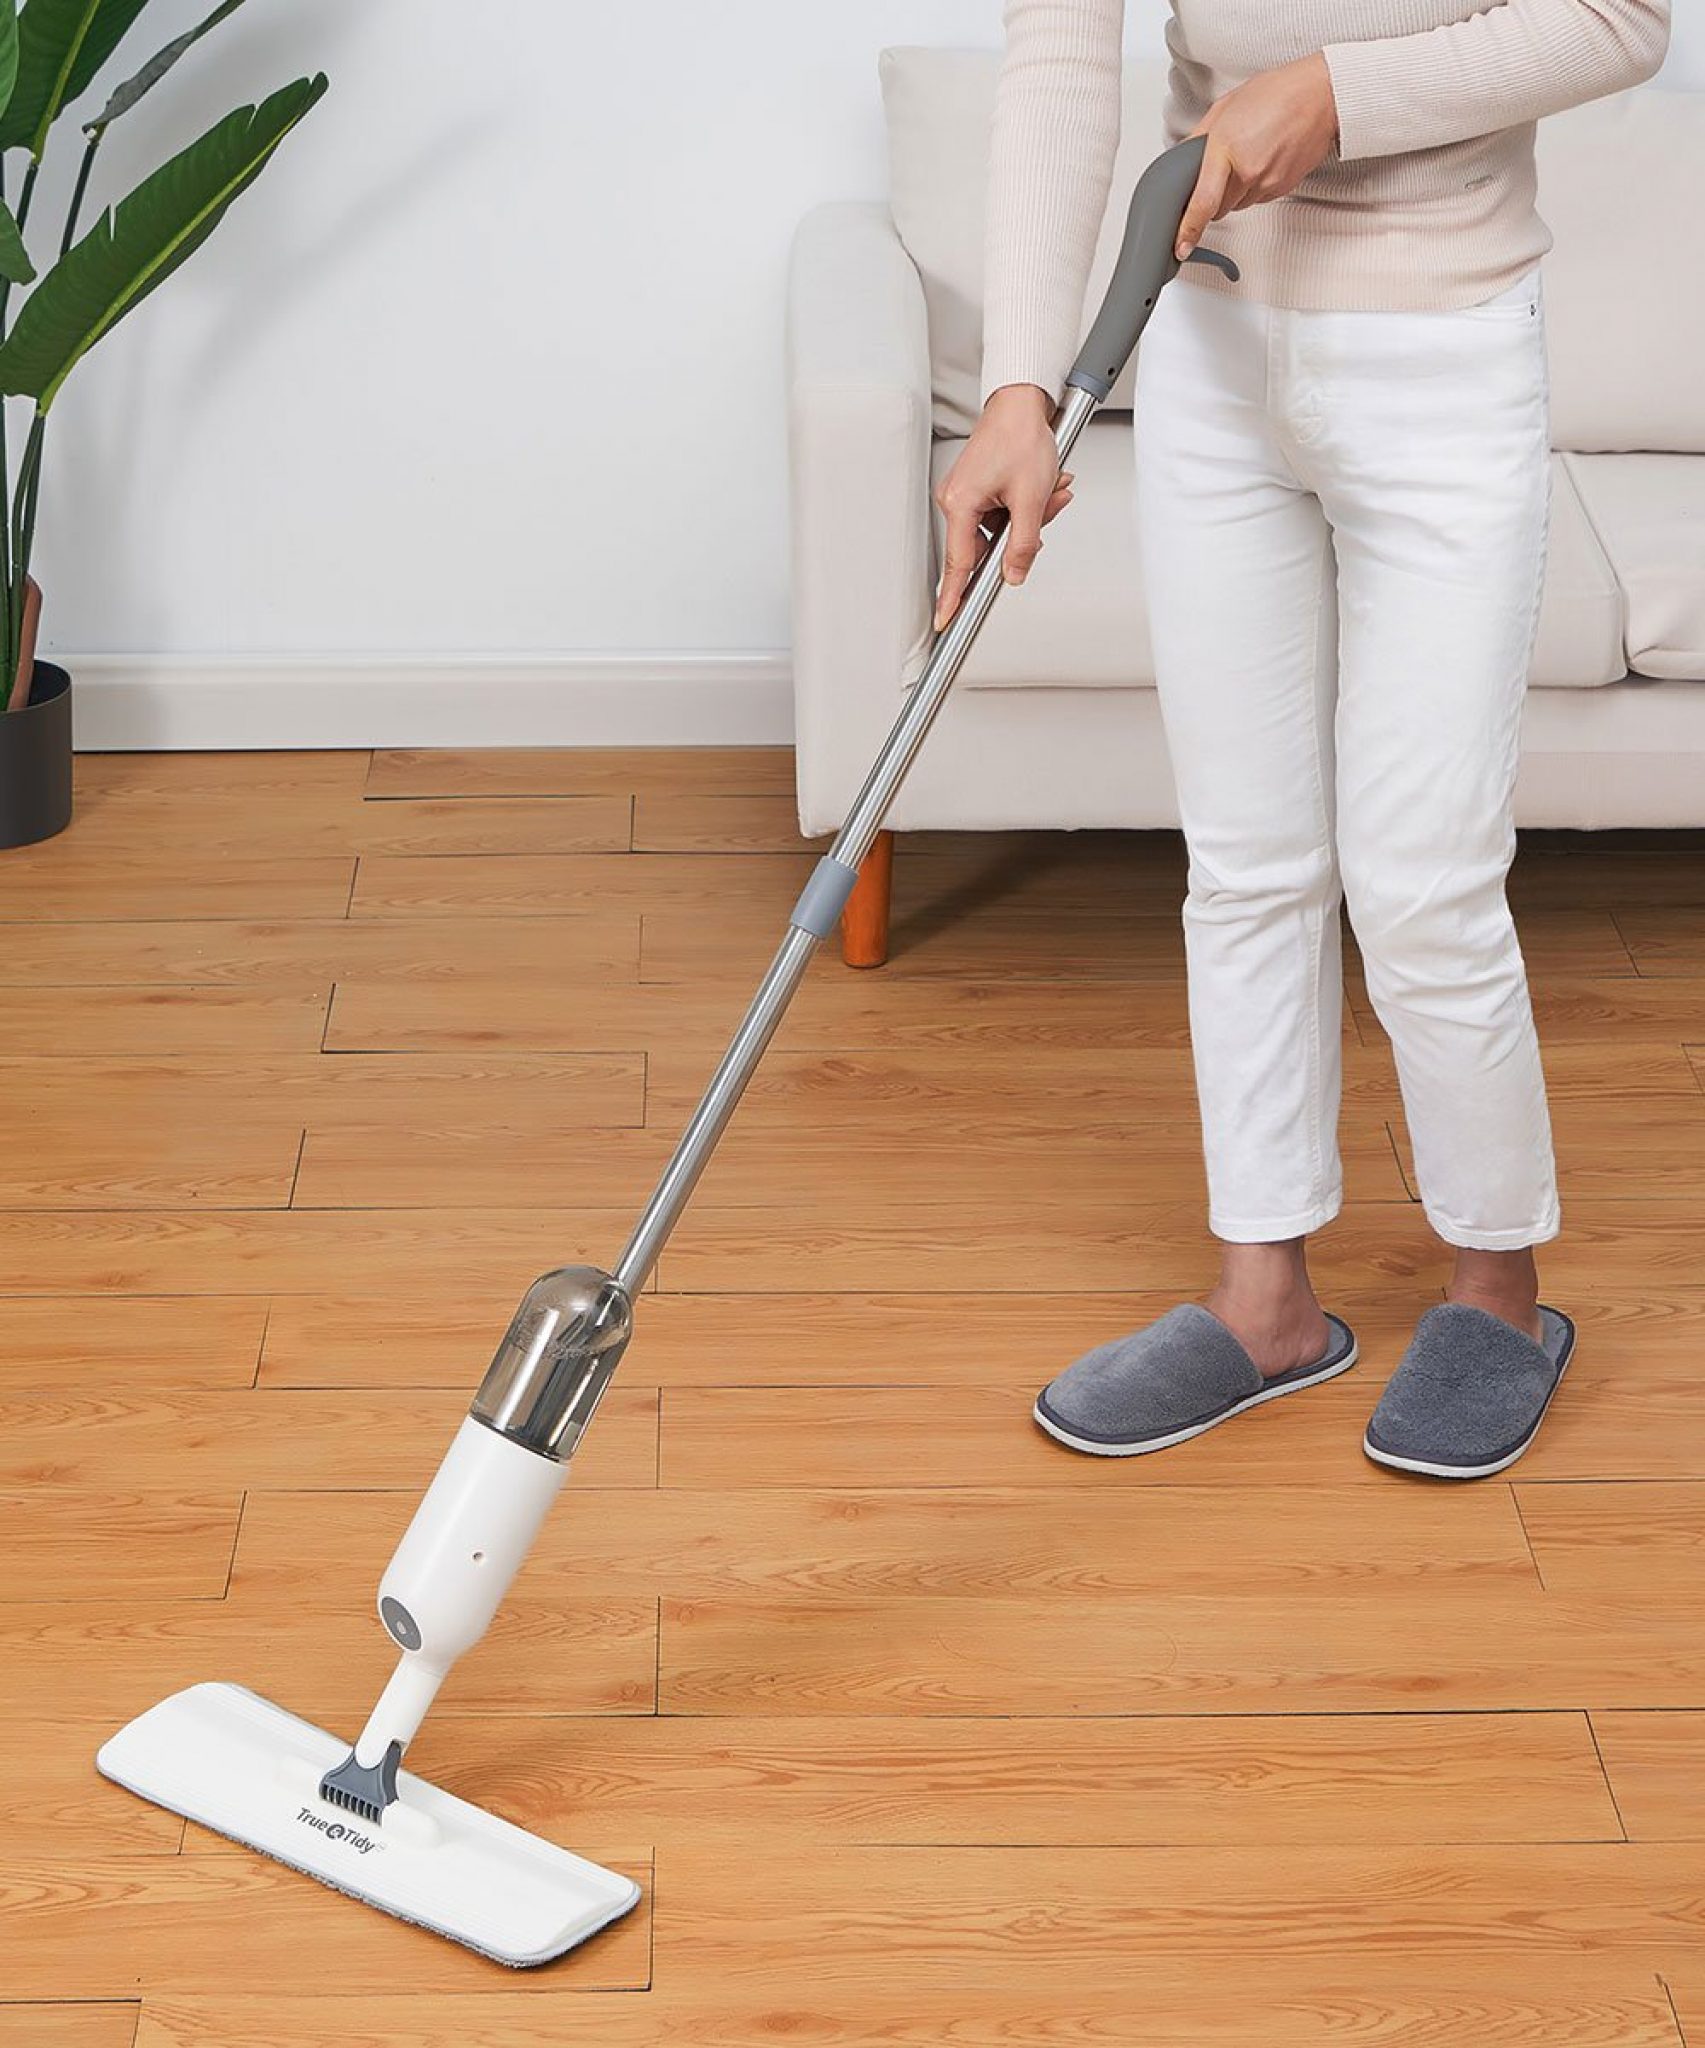 True and Tidy Spray Mop Huge Price Drop at Zulily! – Yes We Coupon